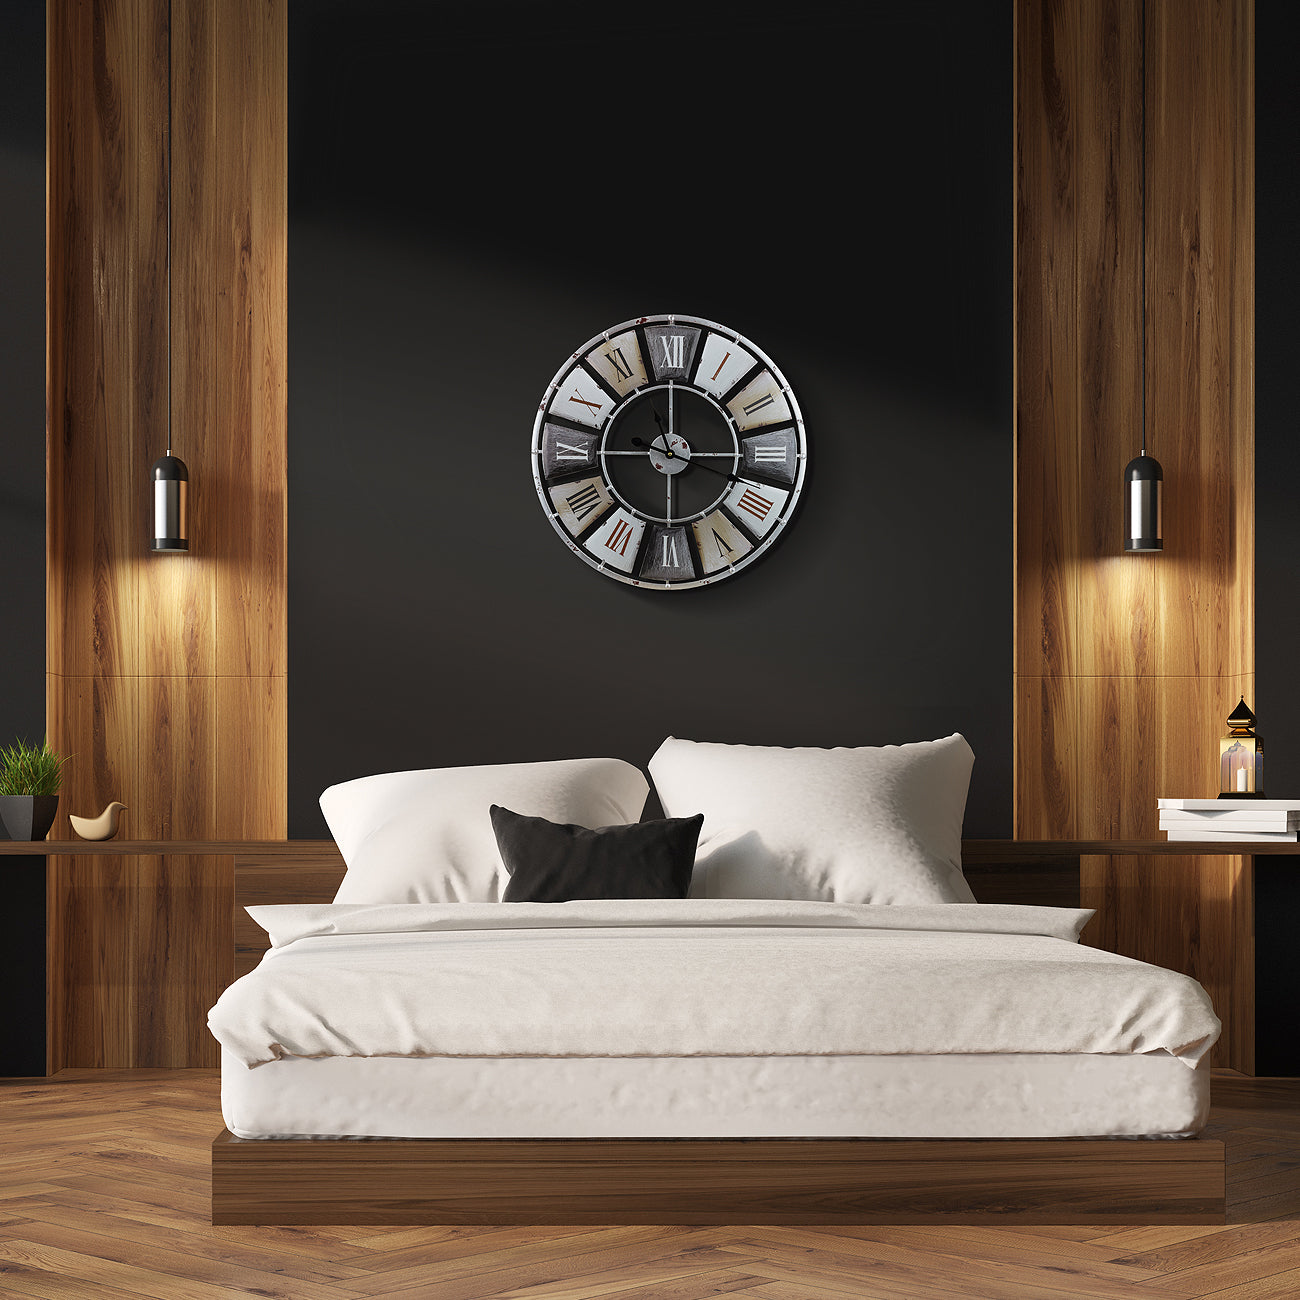 60cm / 24 Oversized Industrial Style Wall Clock, Big Round Wooden